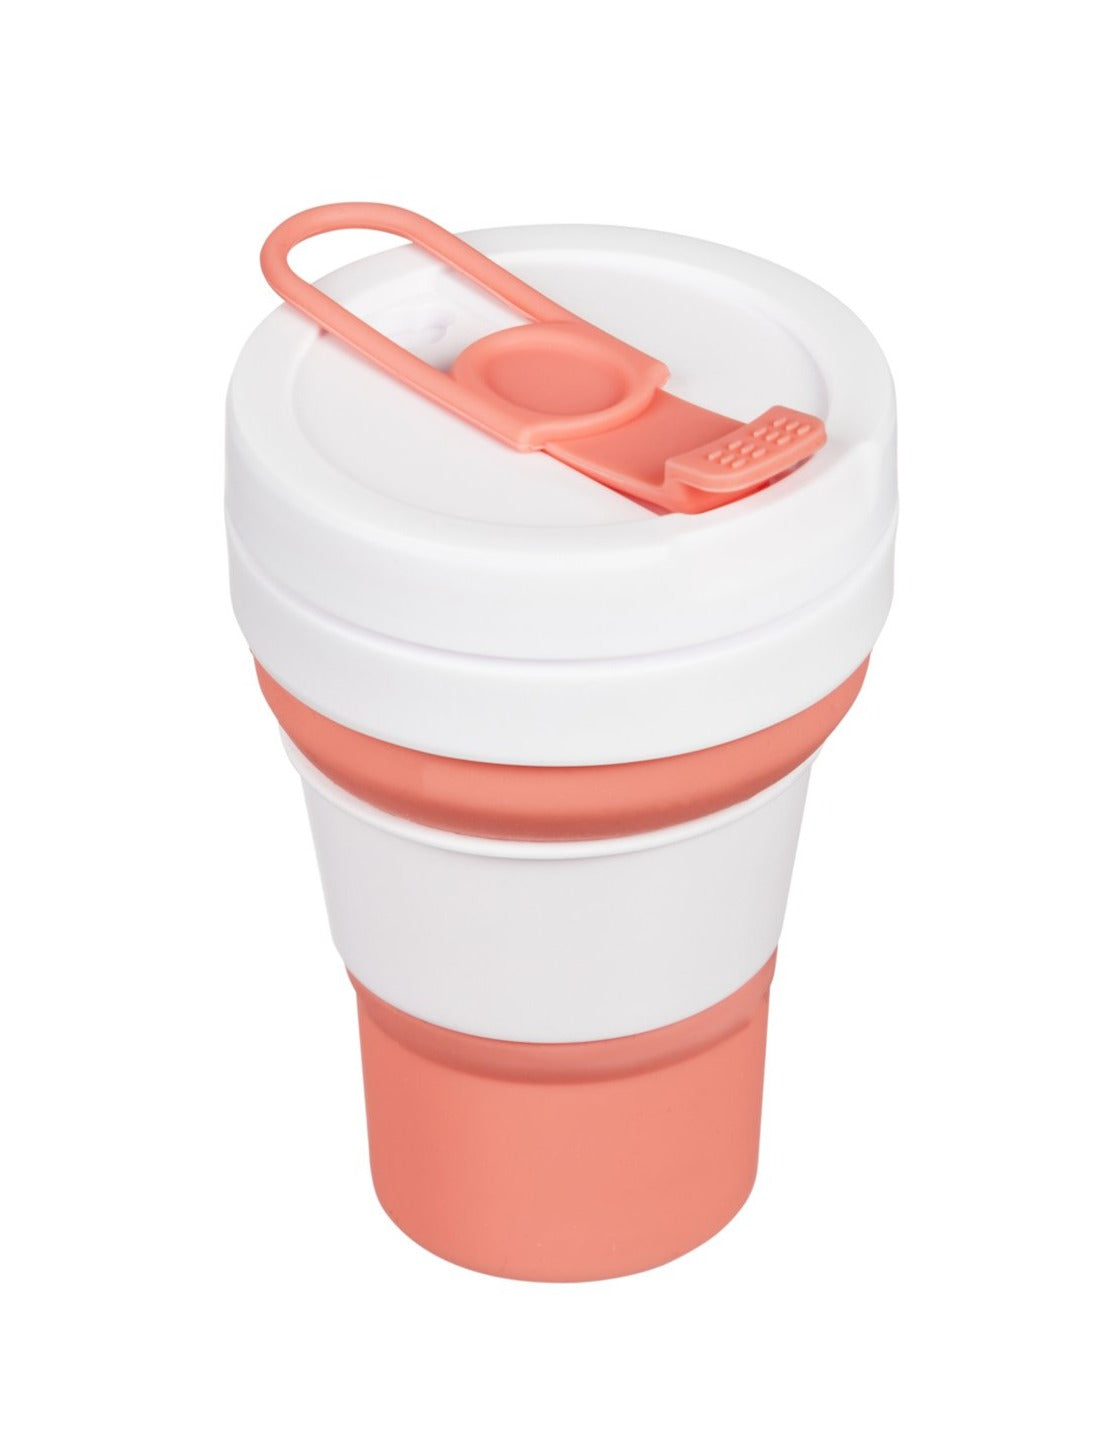 Silicone Coffee Cup, Silicone Cups, Collapsible Travel Cup